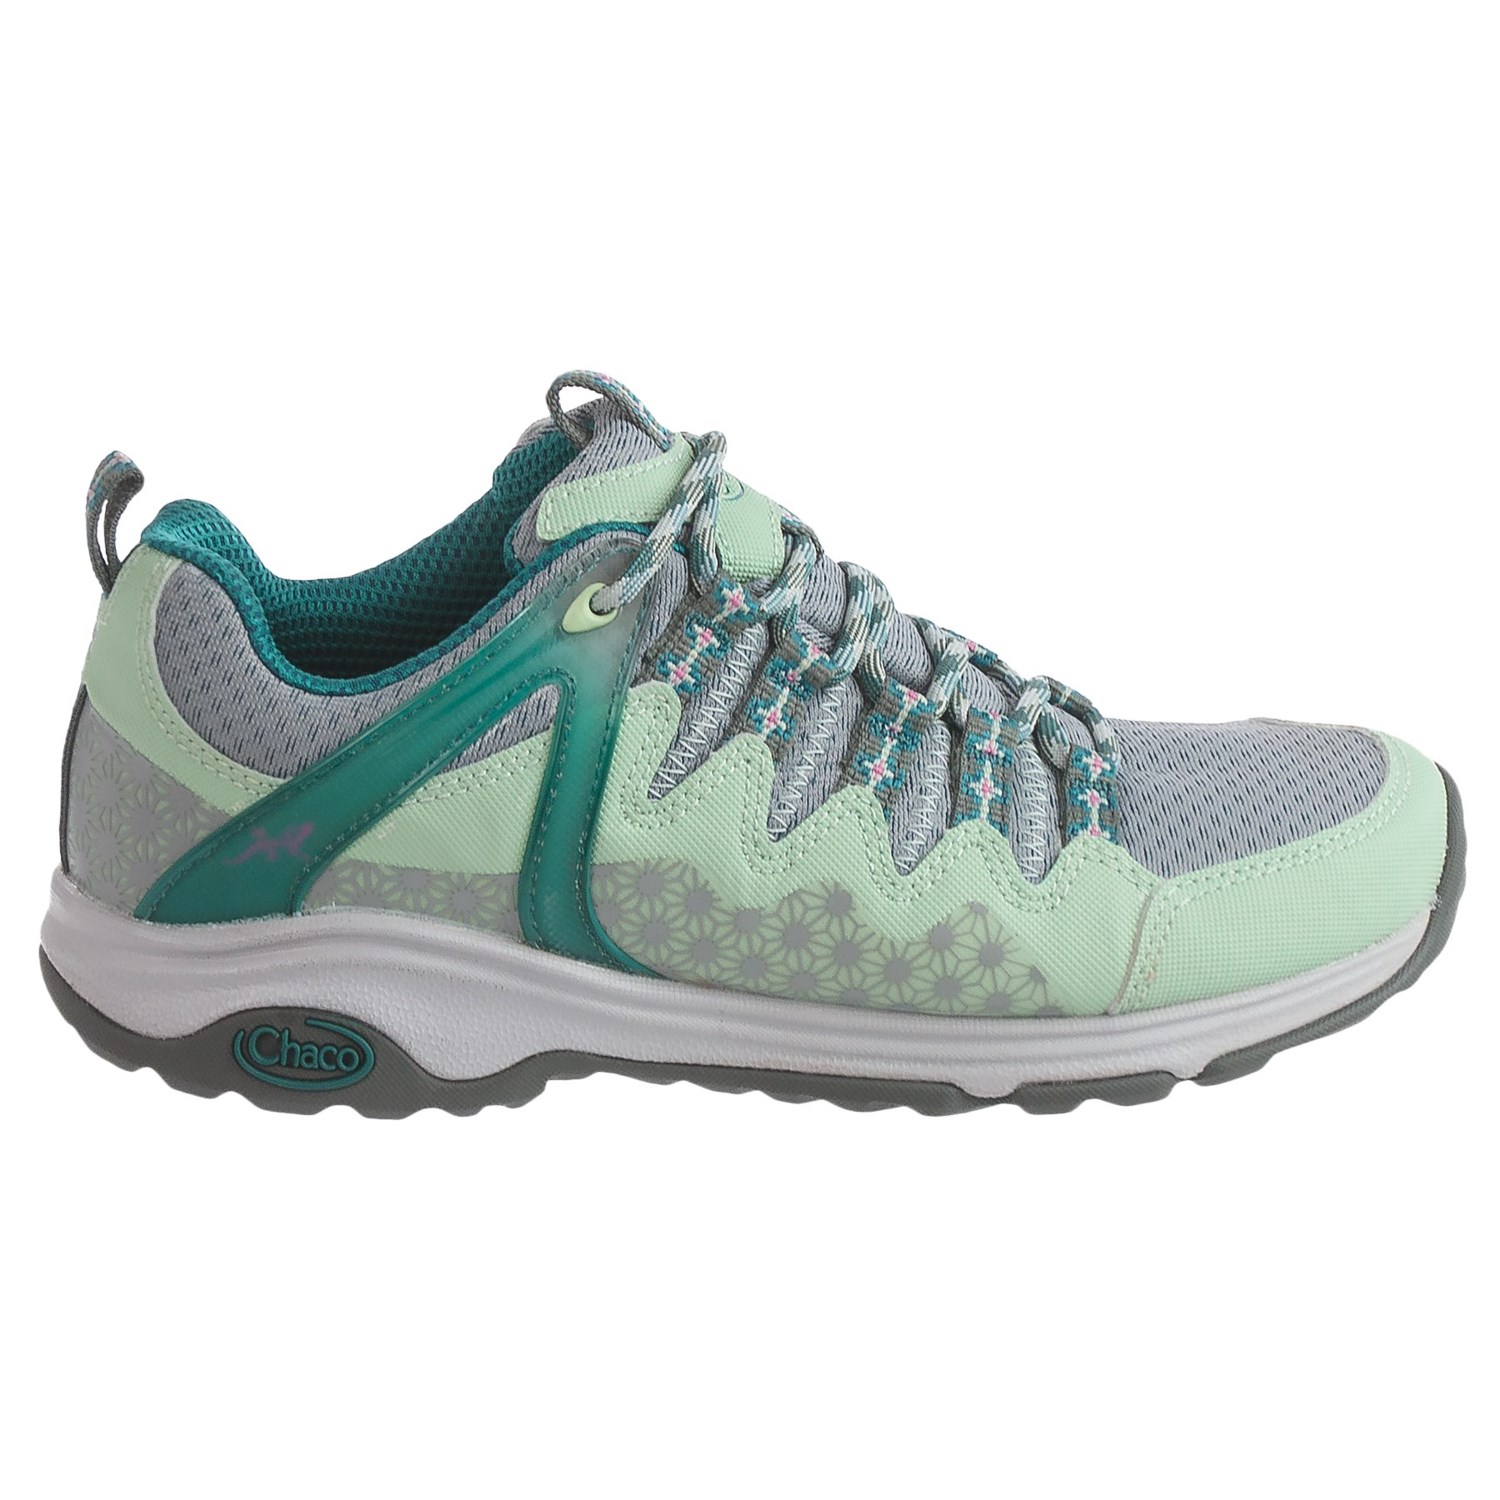 Chaco OutCross Evo 4 Water Shoes (For Women) - Save 45%